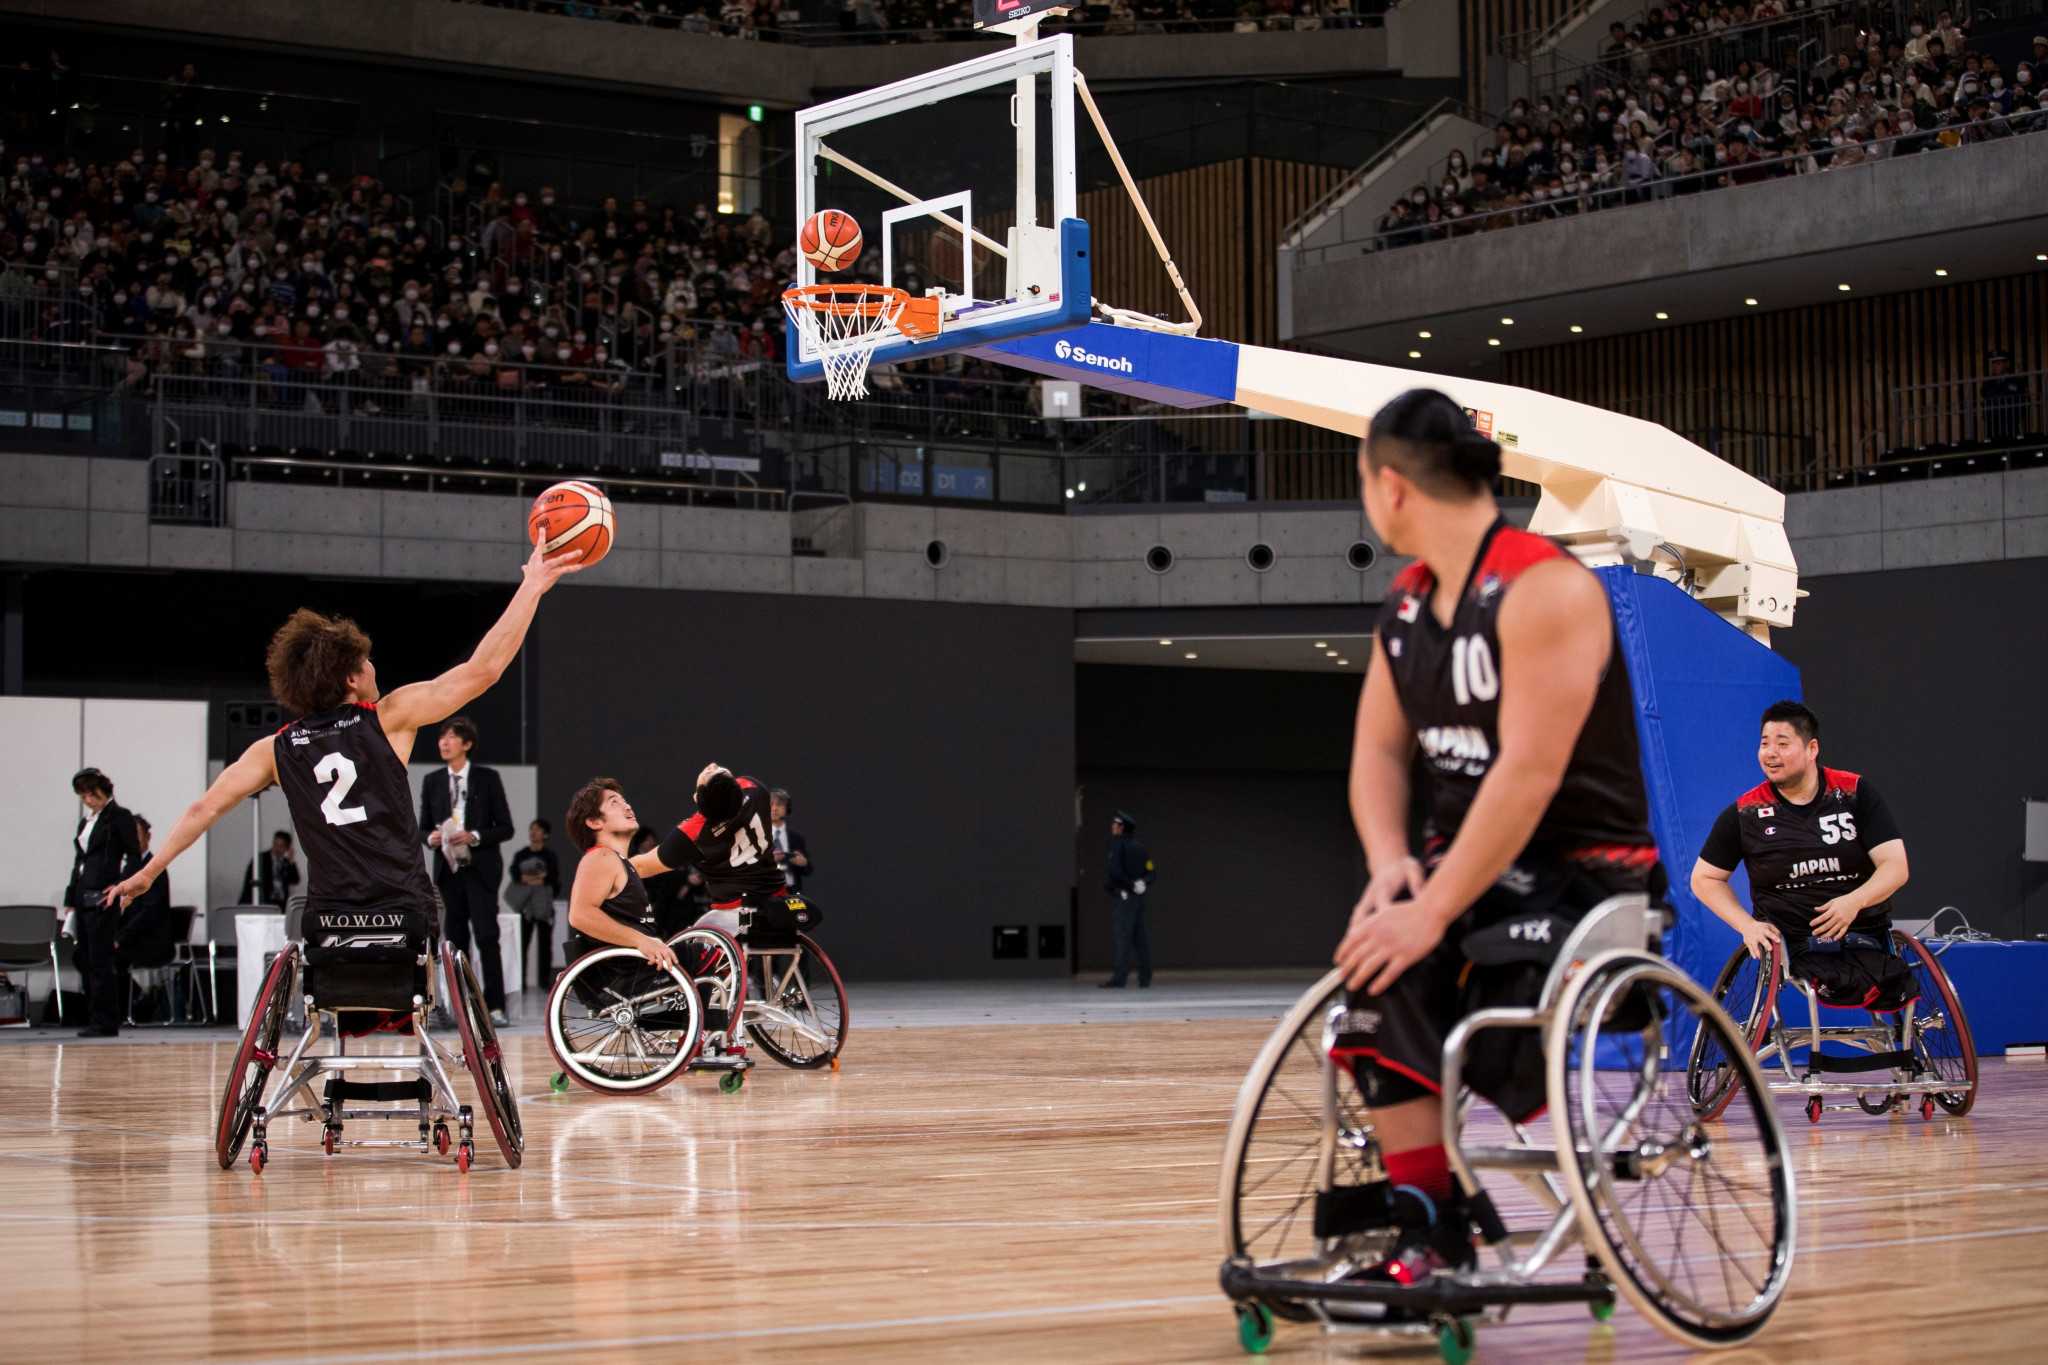 Samsung will provide valuable support to the successful delivery of the Tokyo 2020
Paralympic Games, it is claimed ©Getty Images